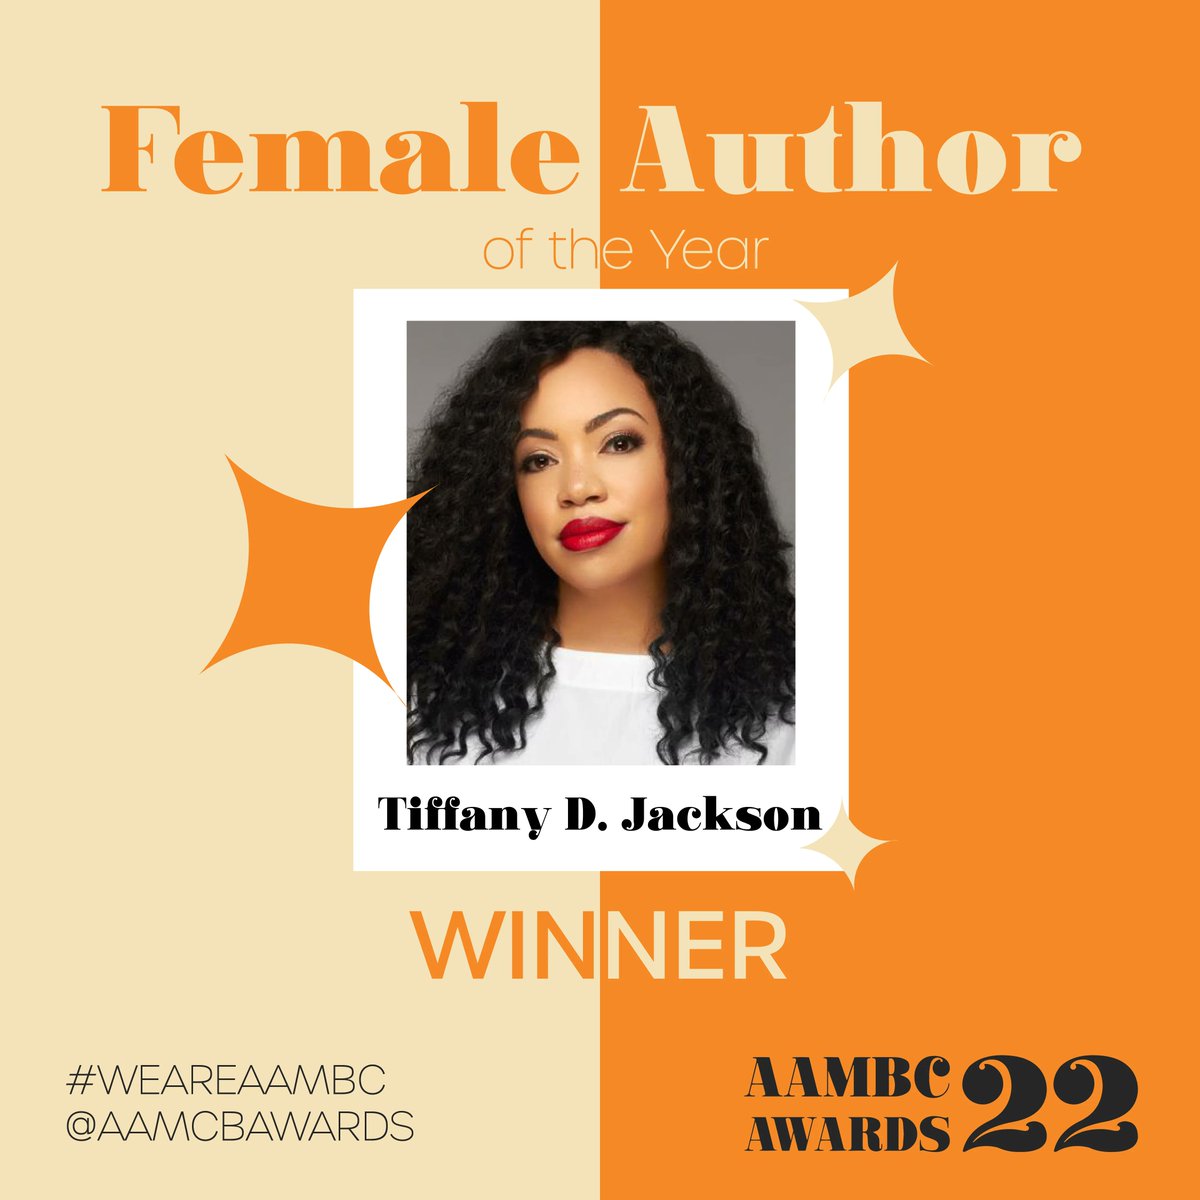 Who runs the world? Girls! And this author shows us how. Congratulations to the winner of this year's #AAMBCAward for Female Author of the Year, @WriteinBK.
#WeAreAAMBC #TheySayWeDontRead #WeAreLit